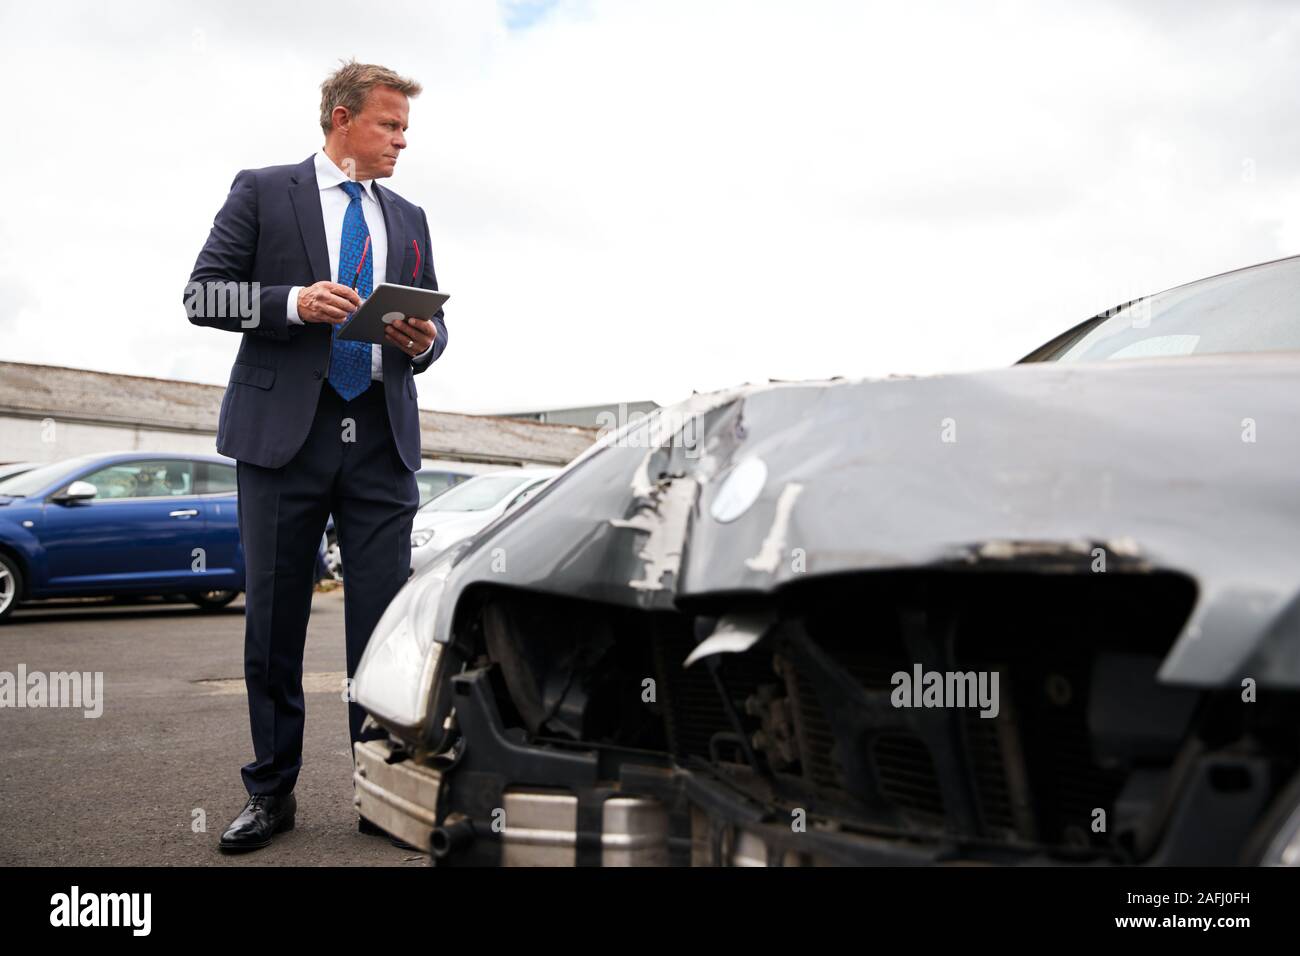 Male Insurance Loss Adjuster With Digital Tablet Inspecting Damage To Car From Motor Accident Stock Photo